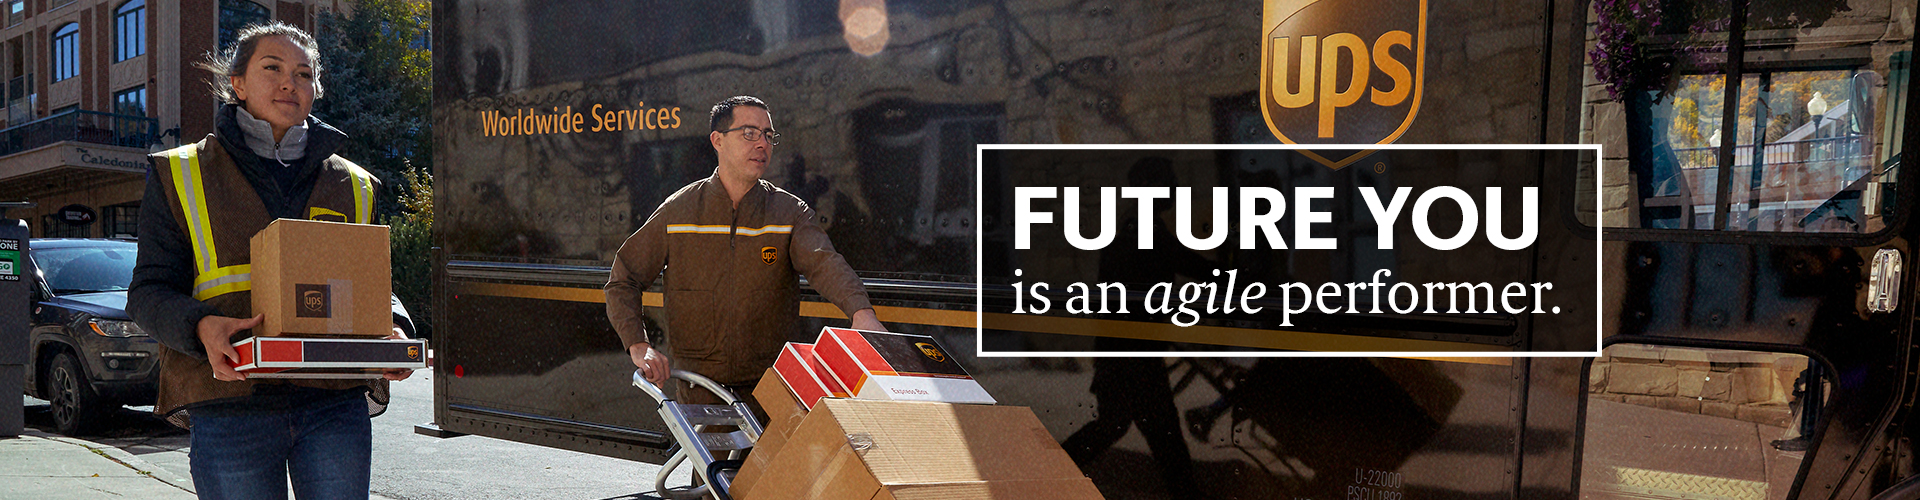 FUTURE YOU is an agile performer.